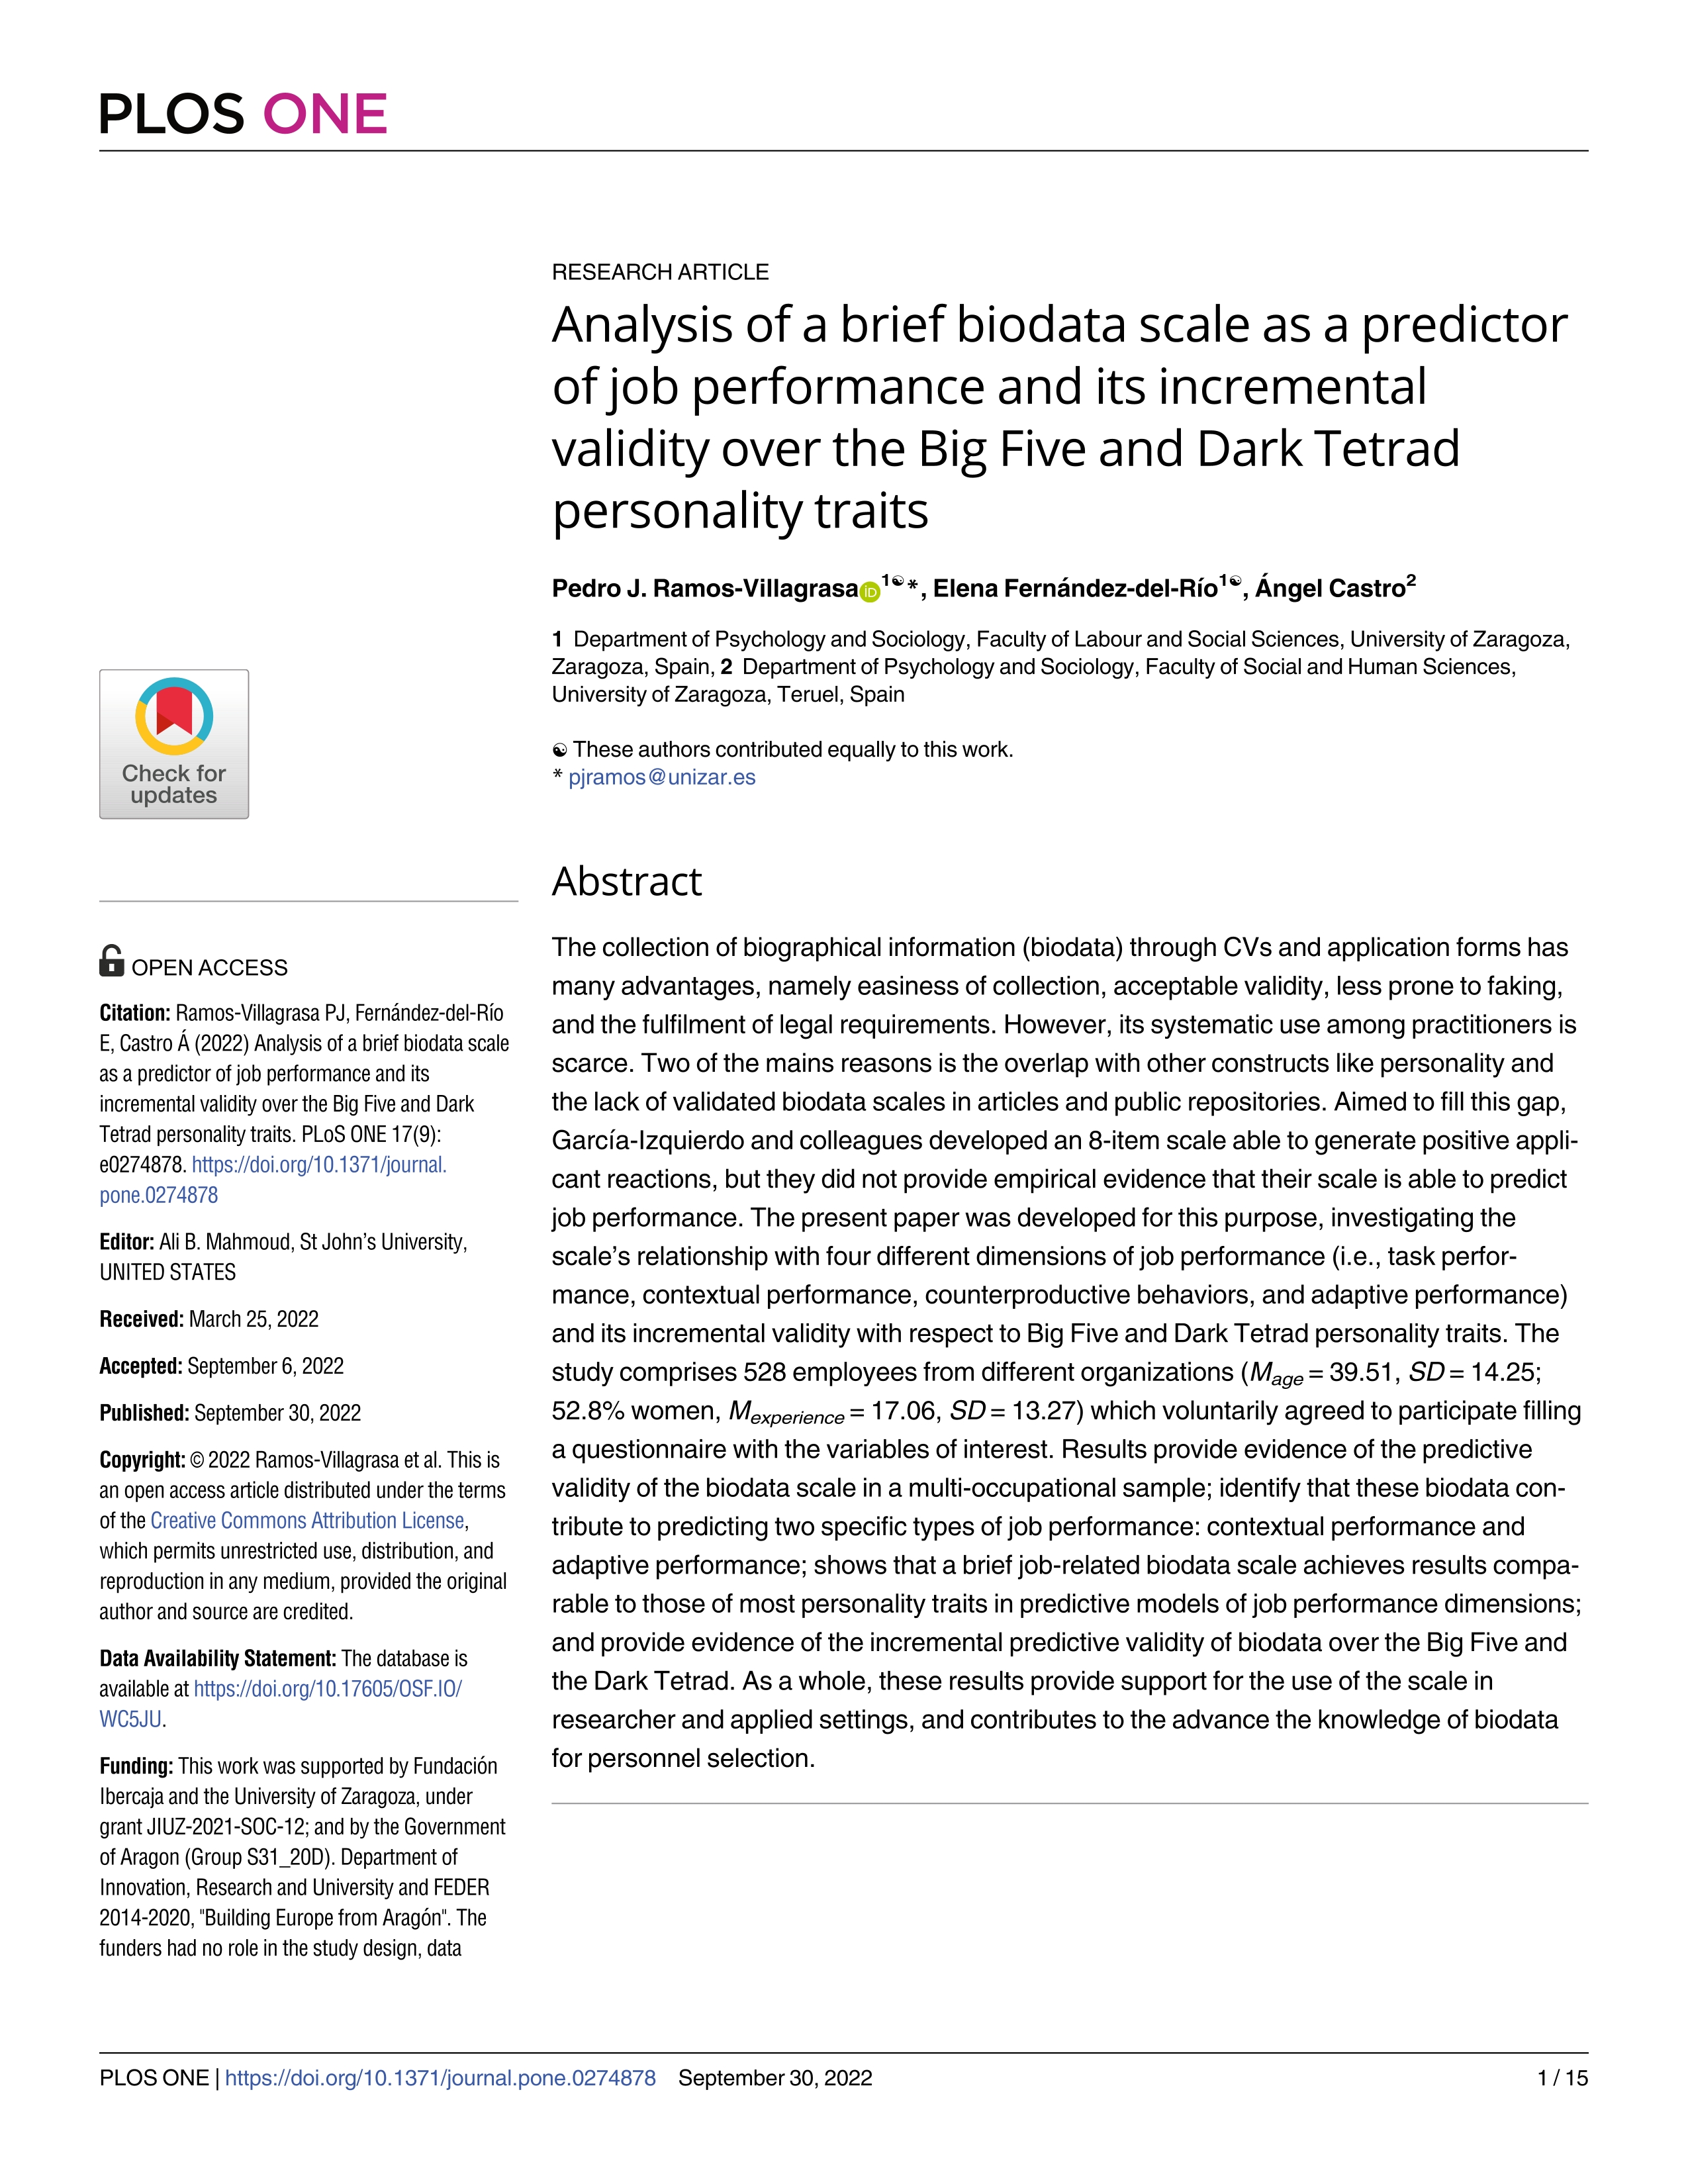 Analysis of a brief biodata scale as a predictor of job performance and its incremental validity over the Big Five and Dark Tetrad personality traits